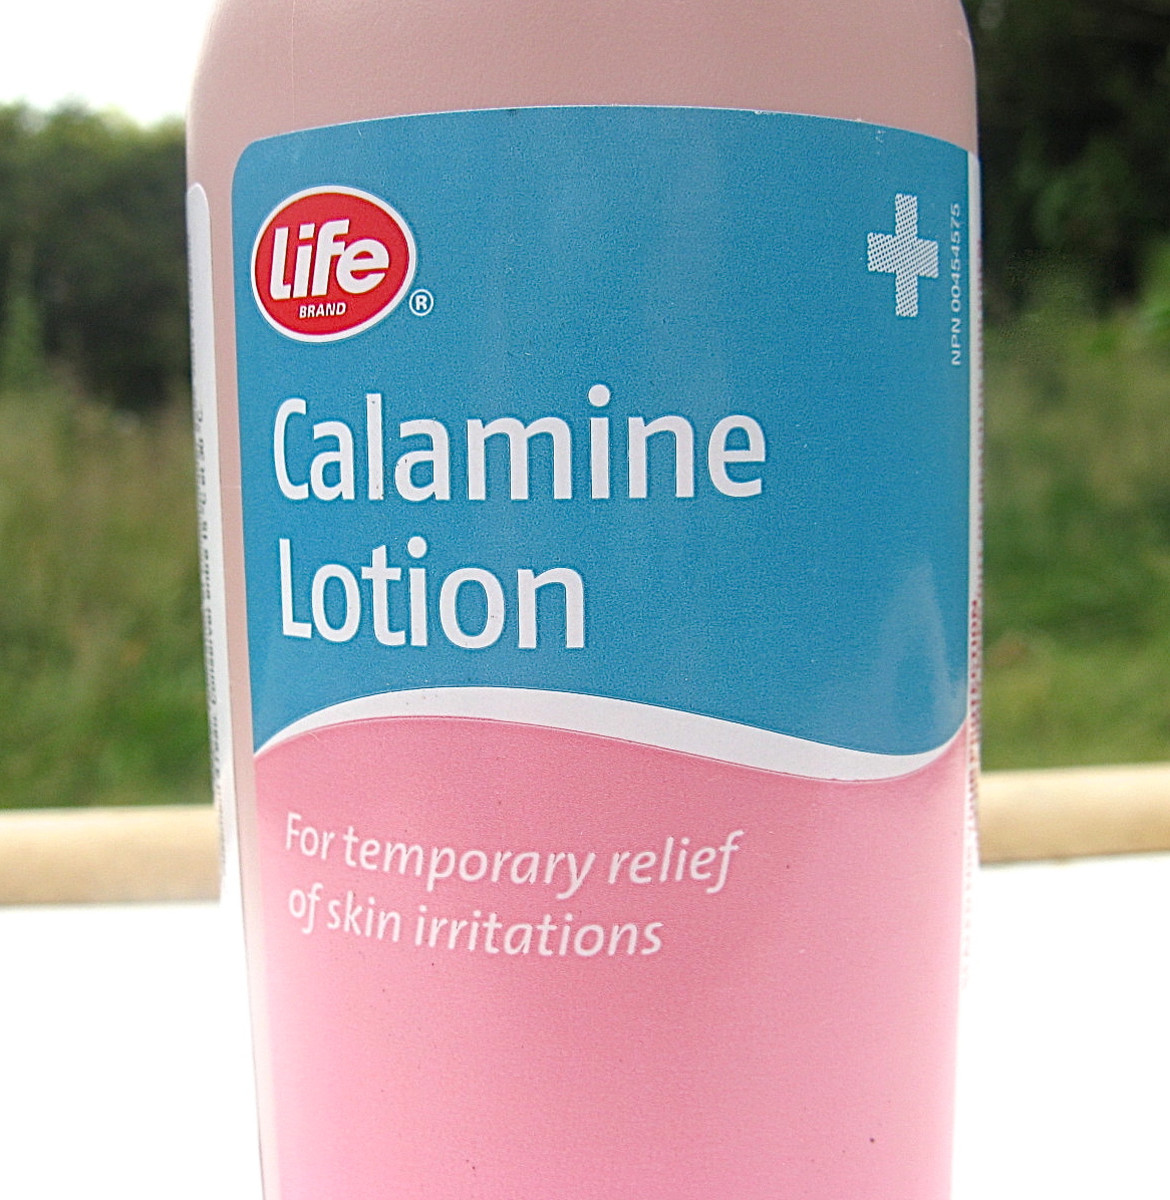 Calamine lotion is a pink liquid and often comes in a pink bottle.